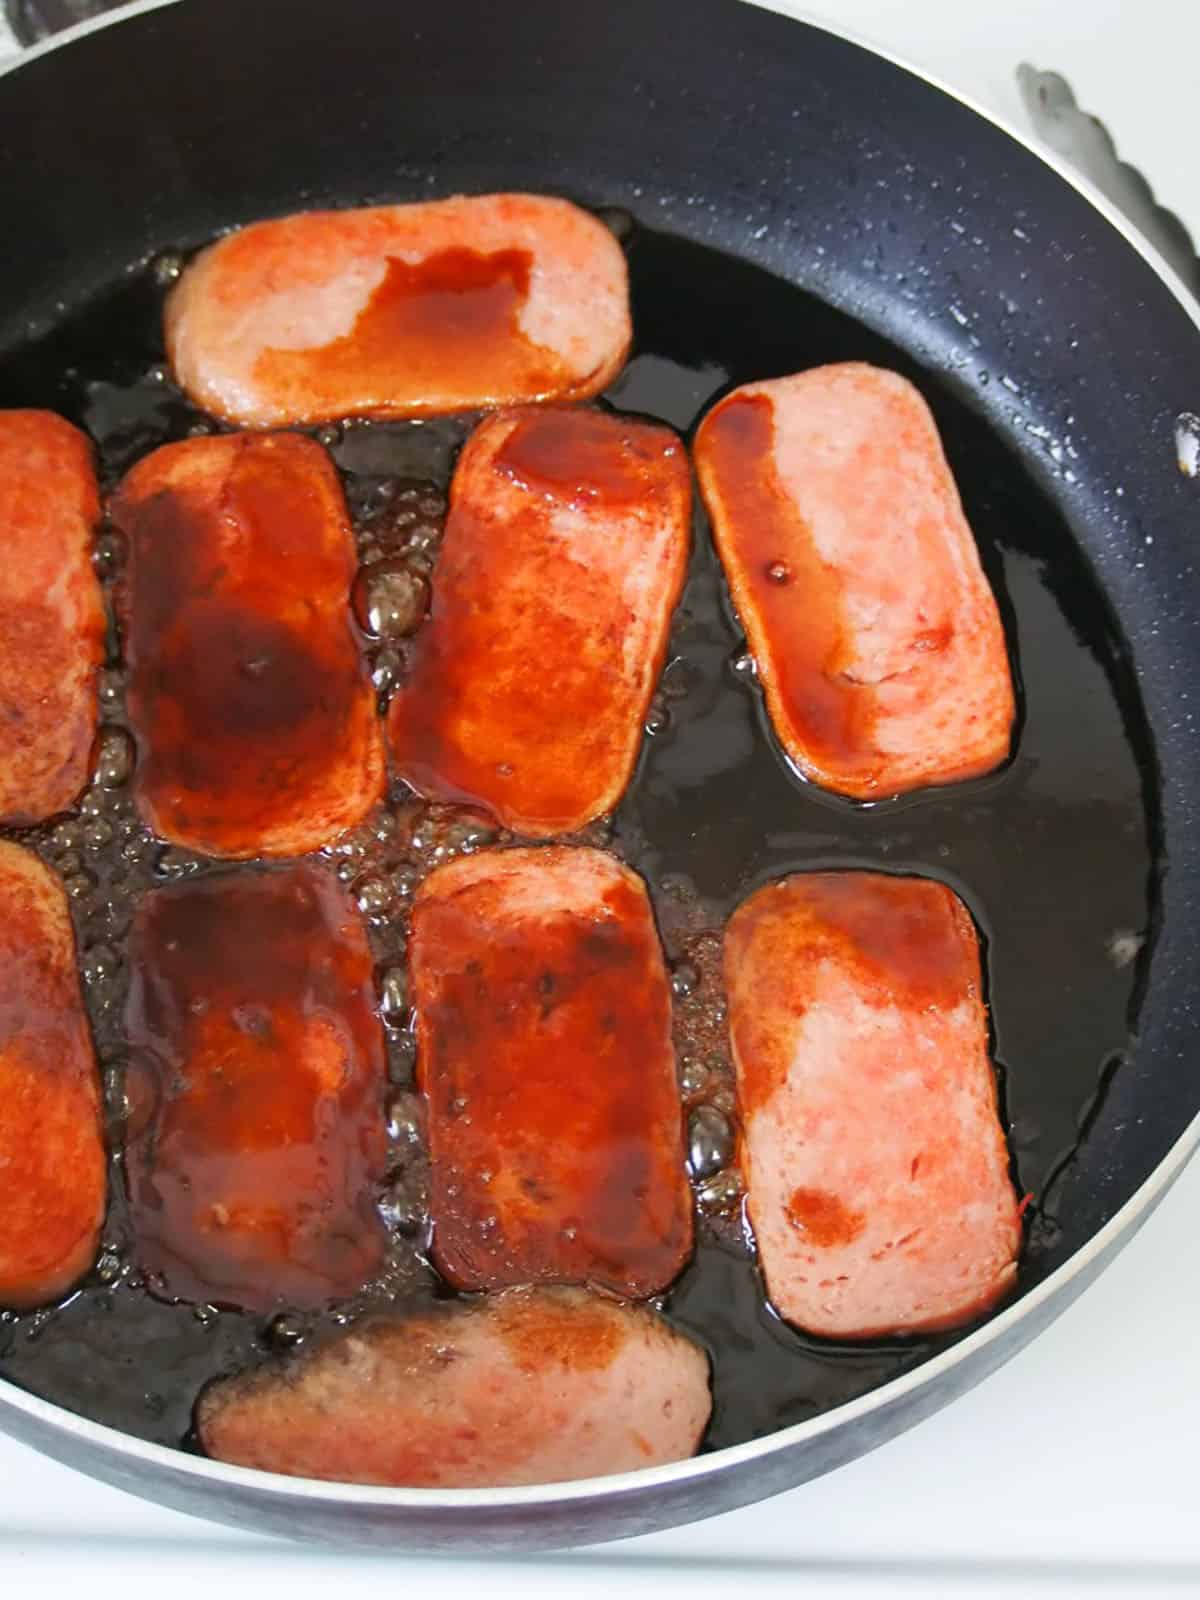 Spam slices pan-grilled in a sweet soy sauce mixture